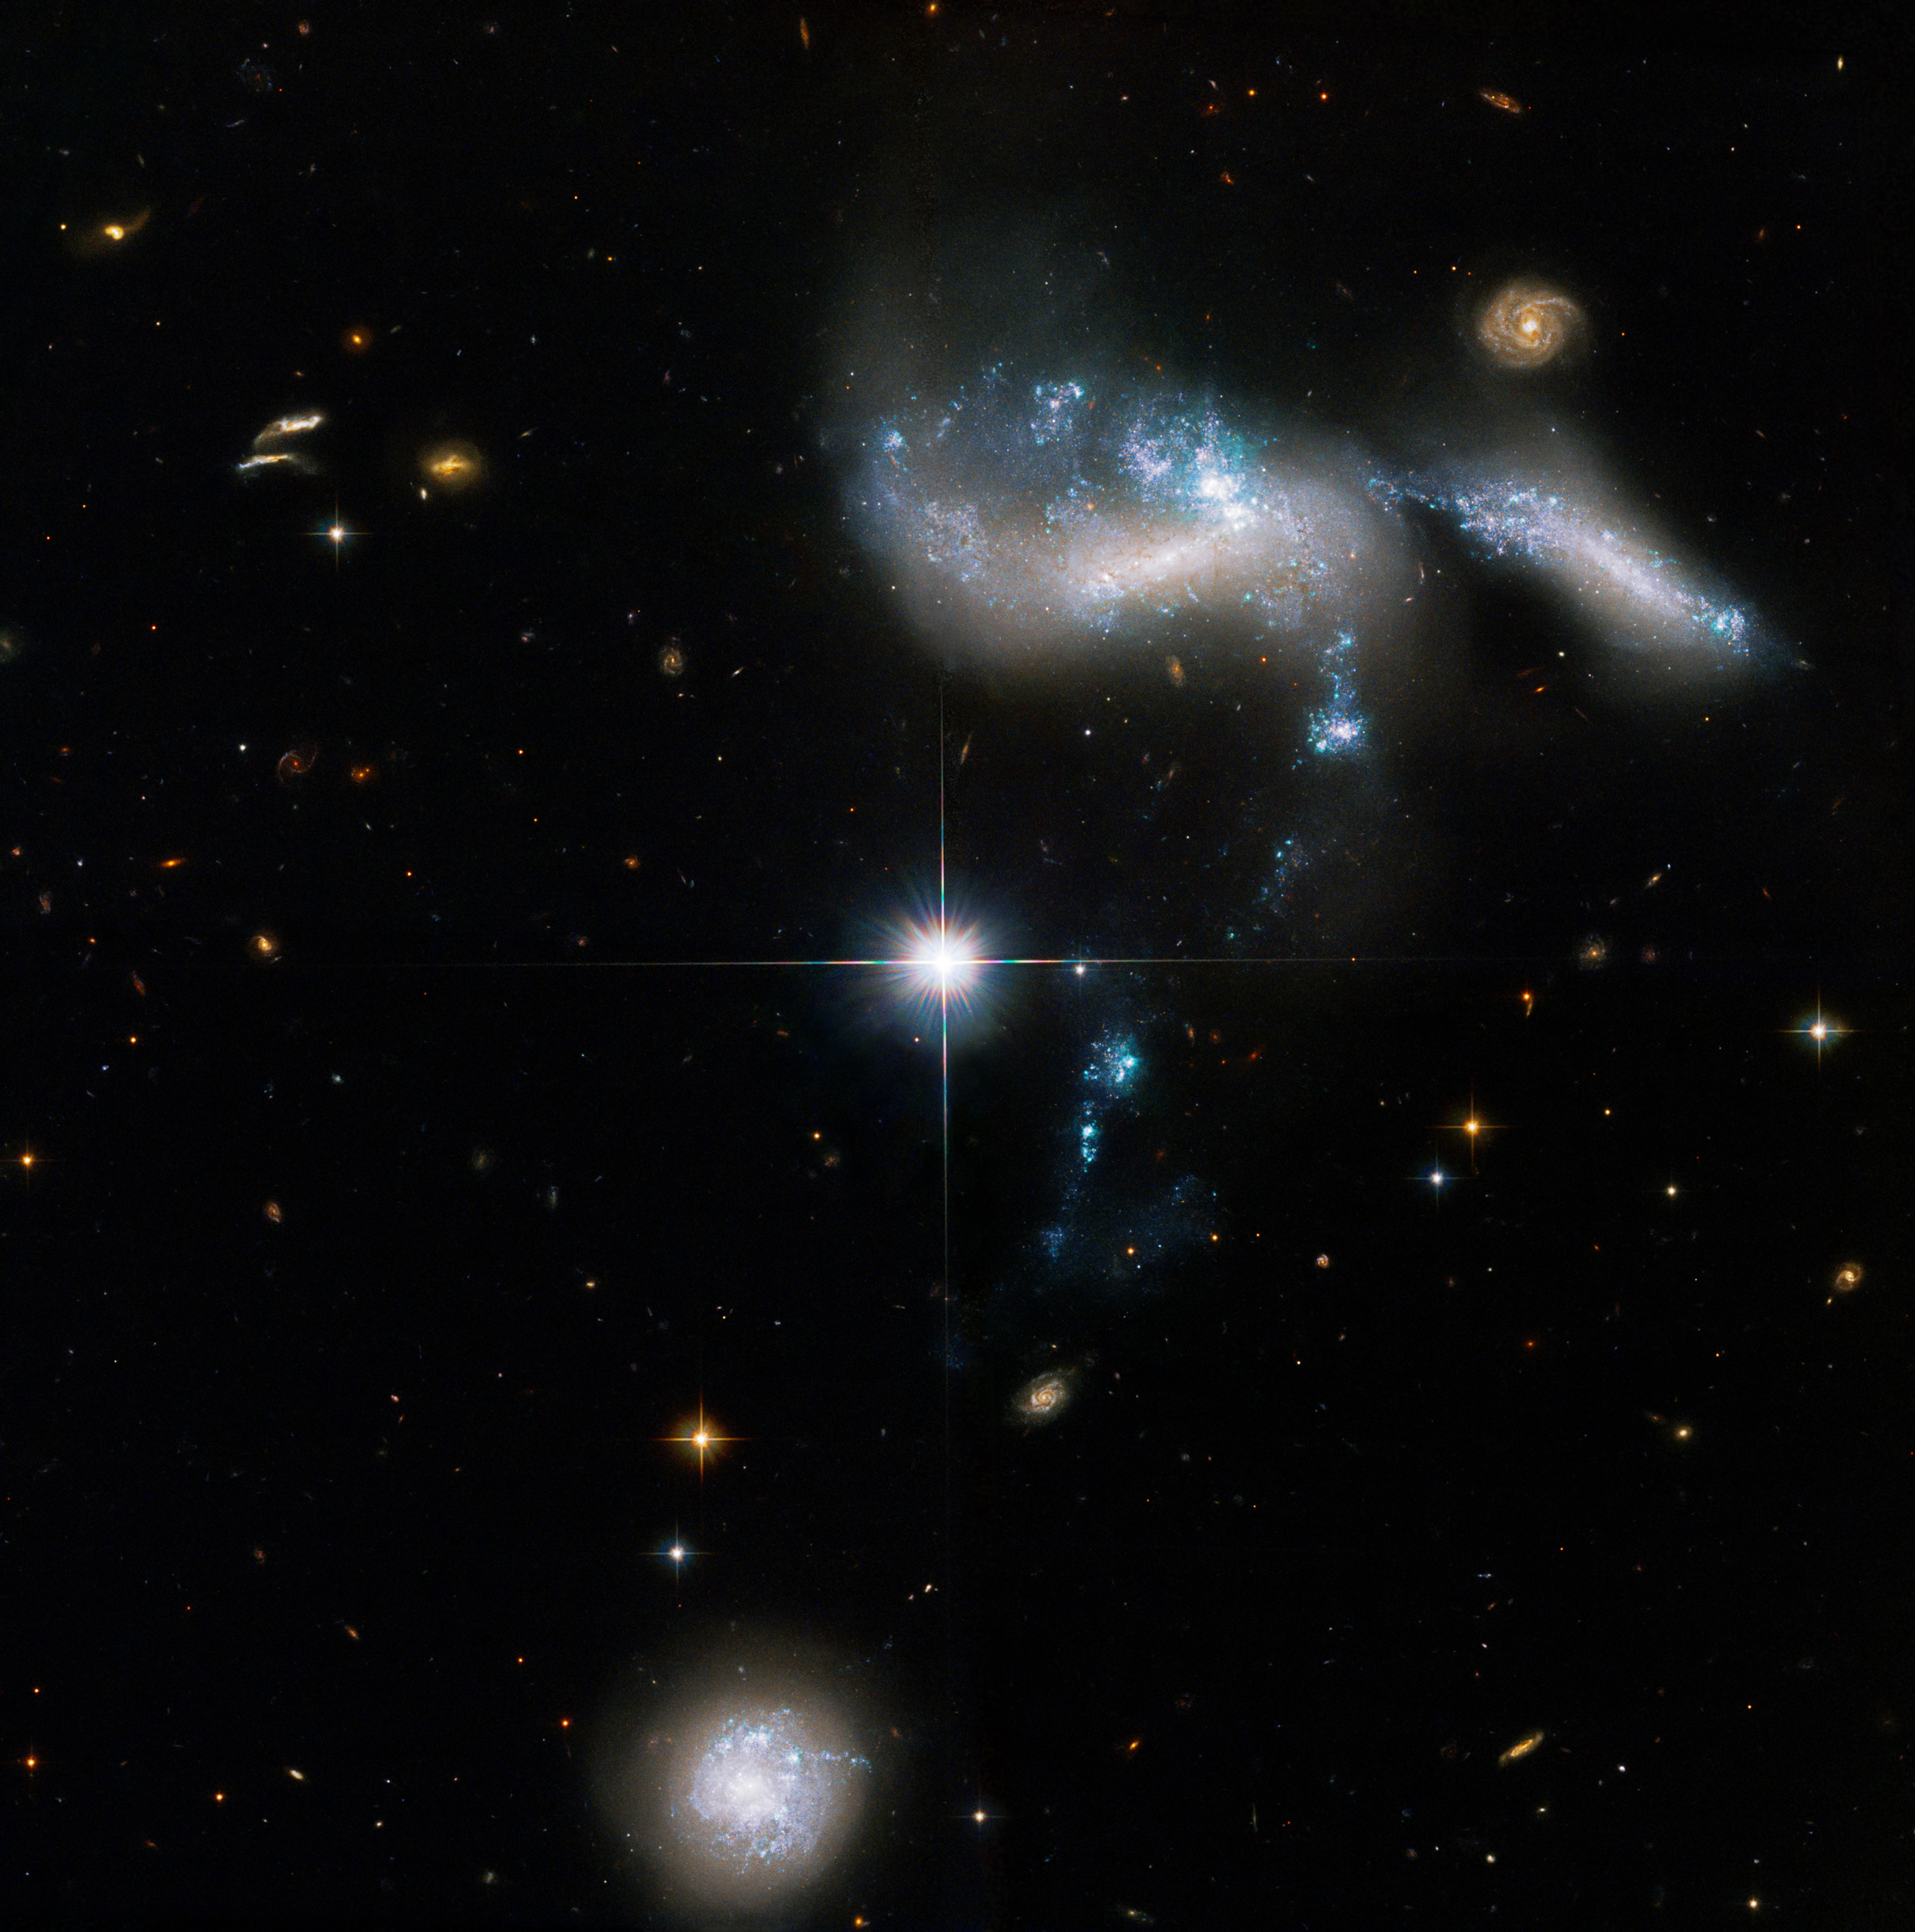 See four dwarf galaxies merging into one in Hubble image